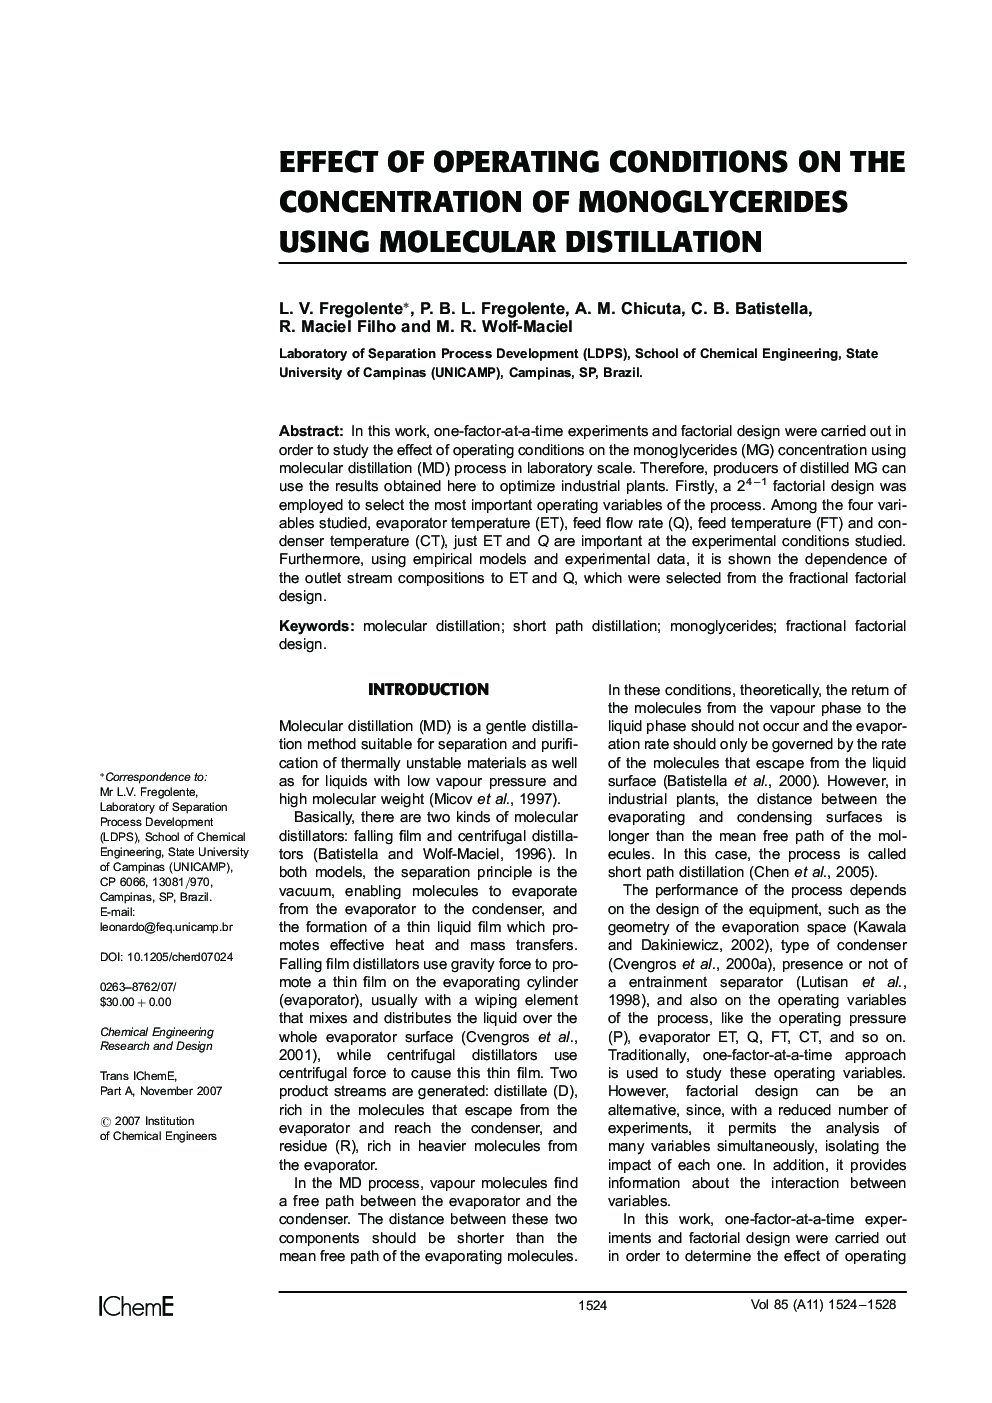 Effect of Operating Conditions on the Concentration of Monoglycerides Using Molecular Distillation